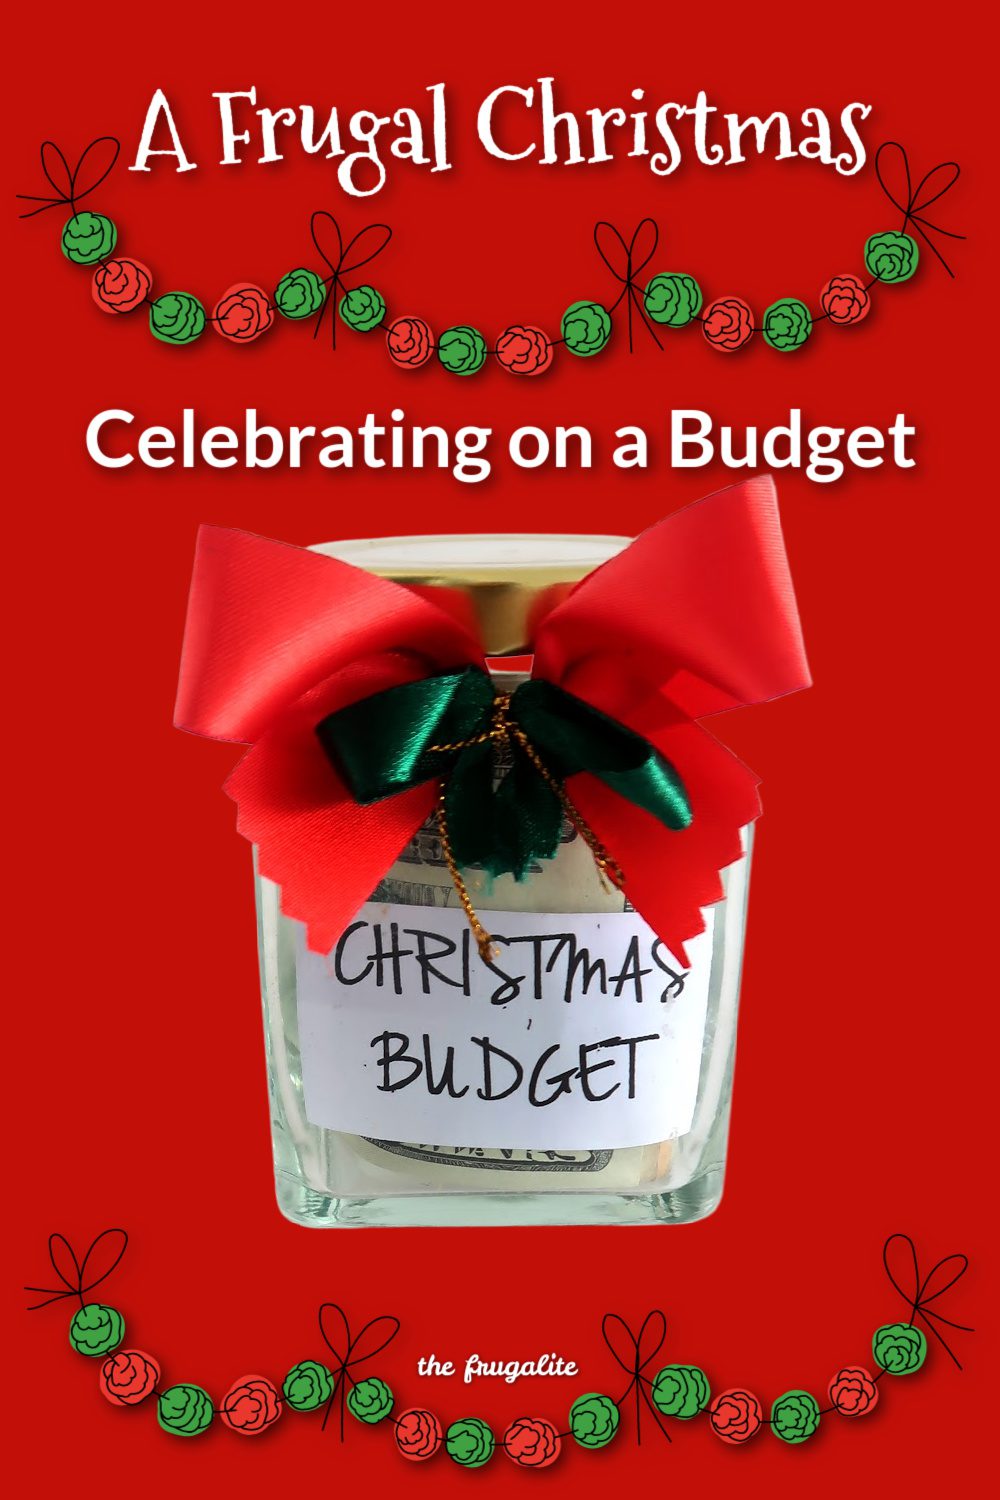 My Frugal Christmas on a Budget